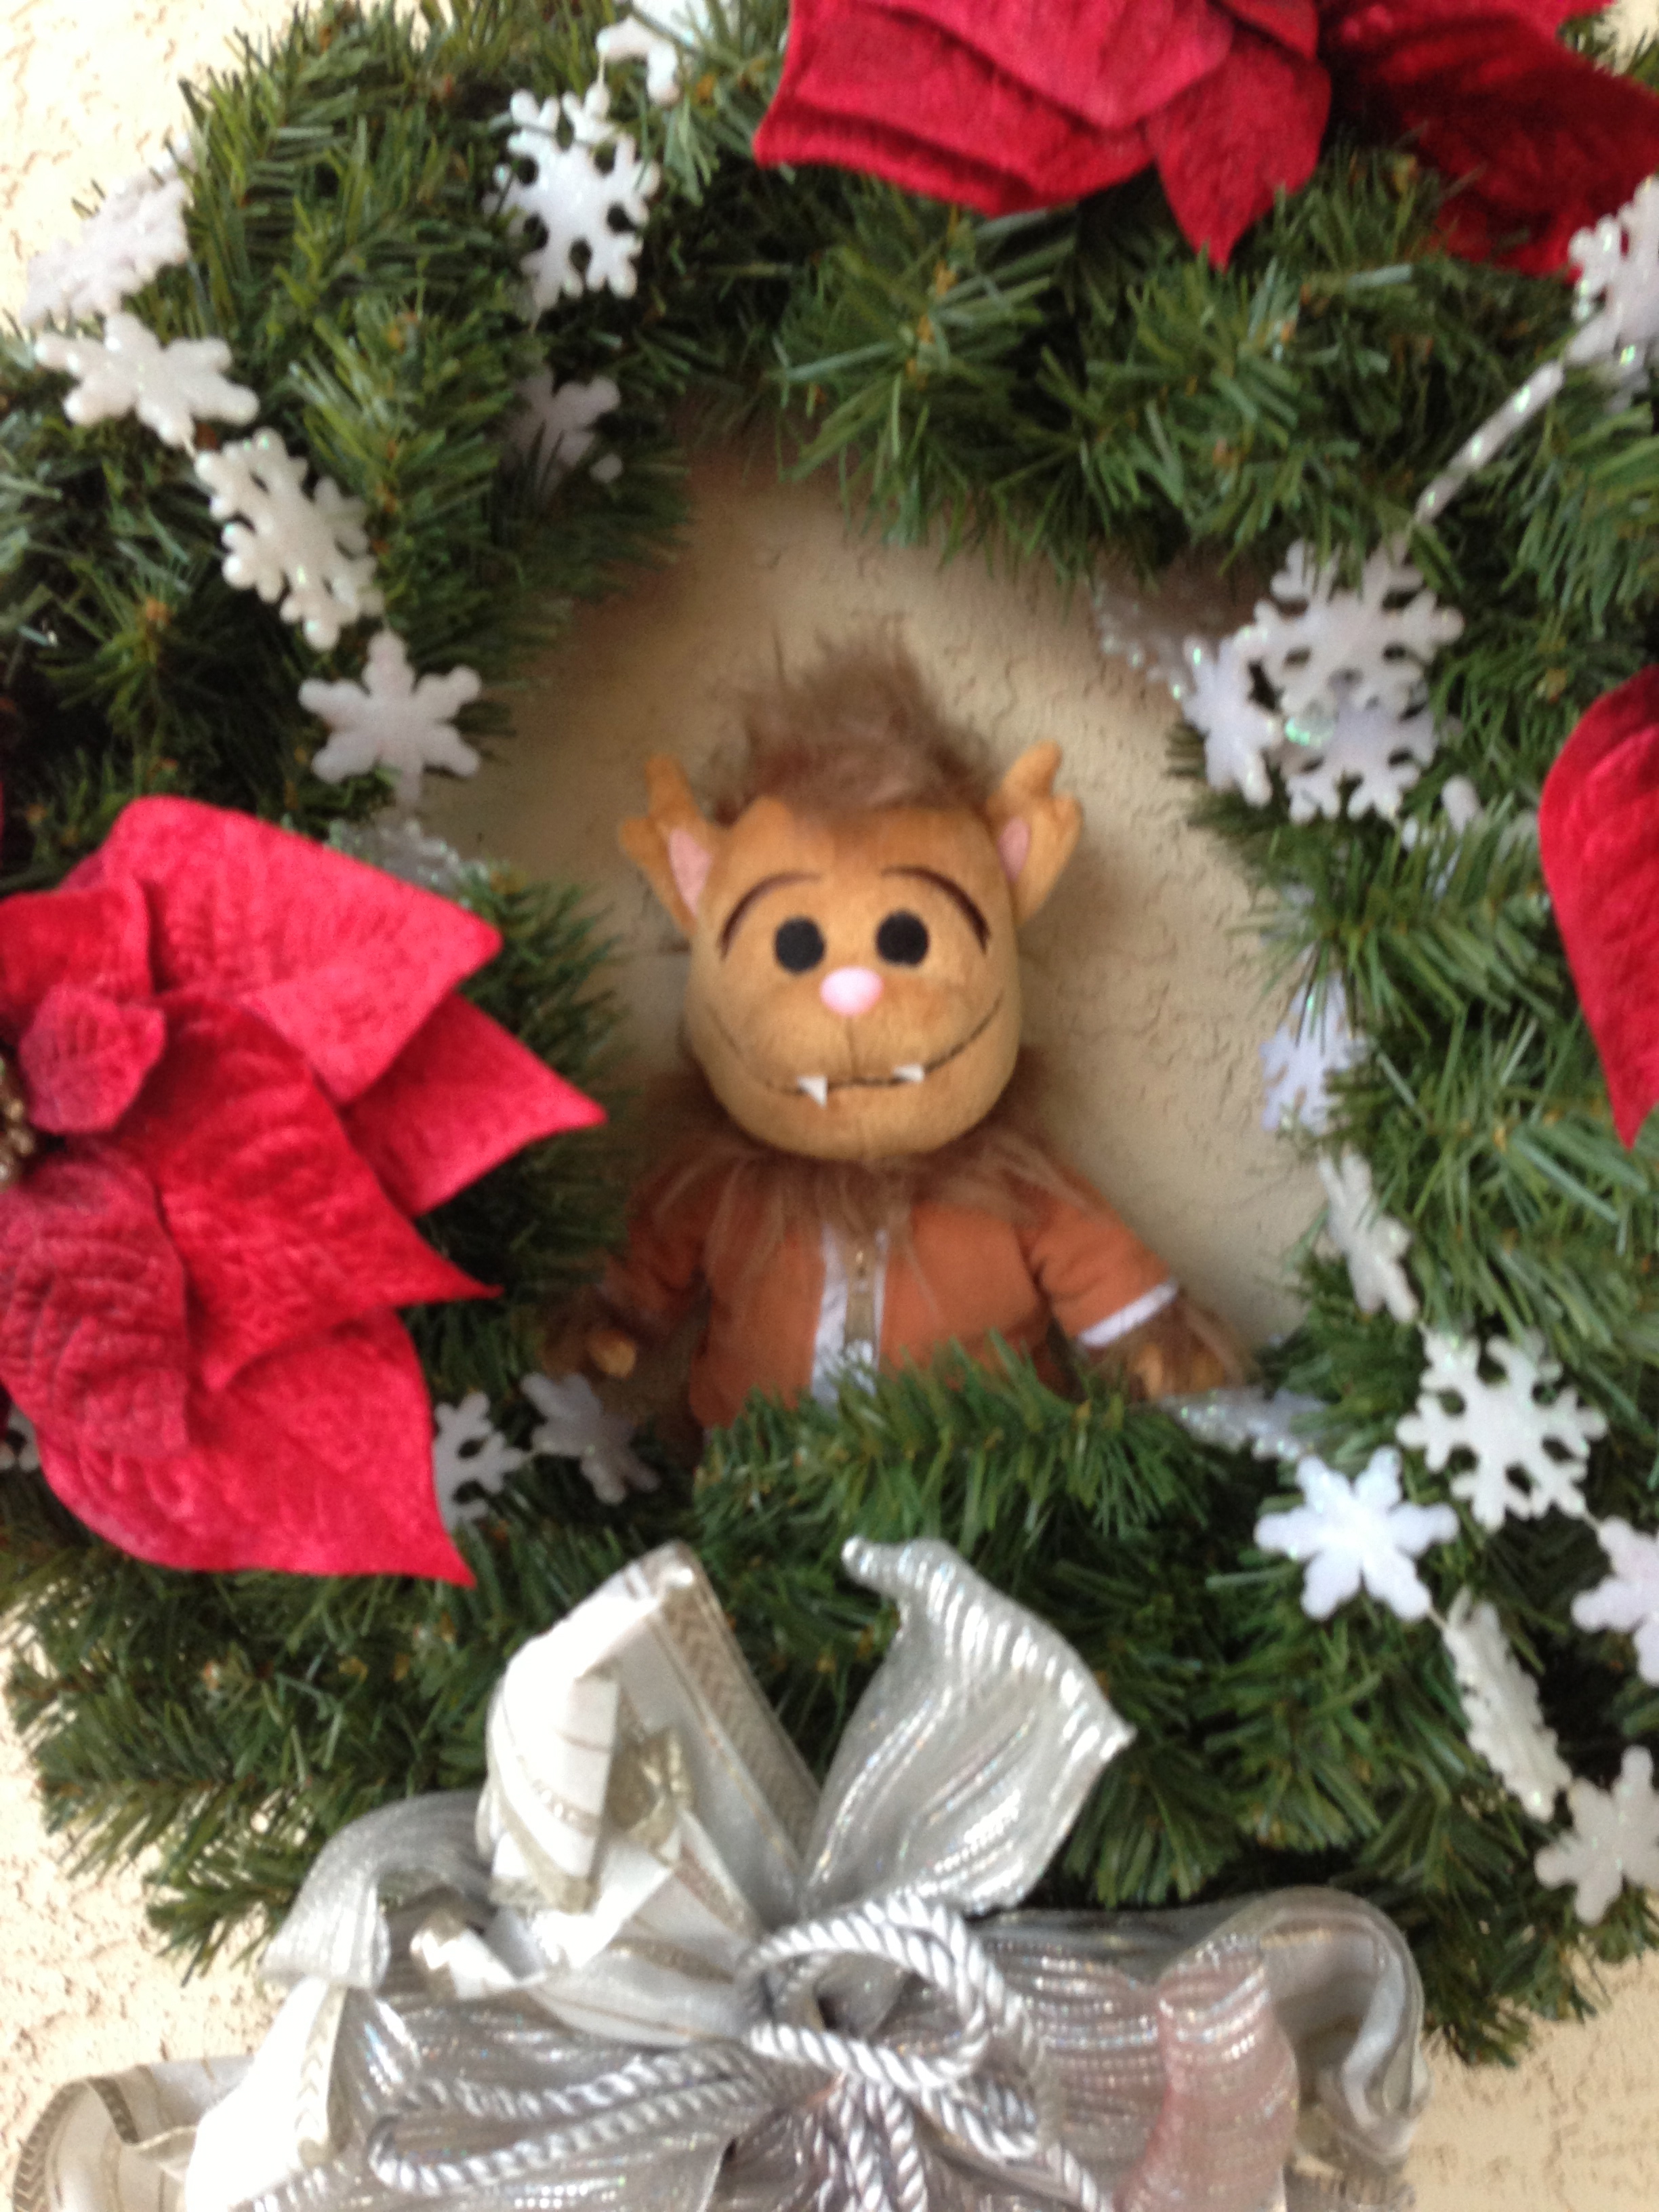 Photo of Wolfie plush toy in the center of a Christmas wreath